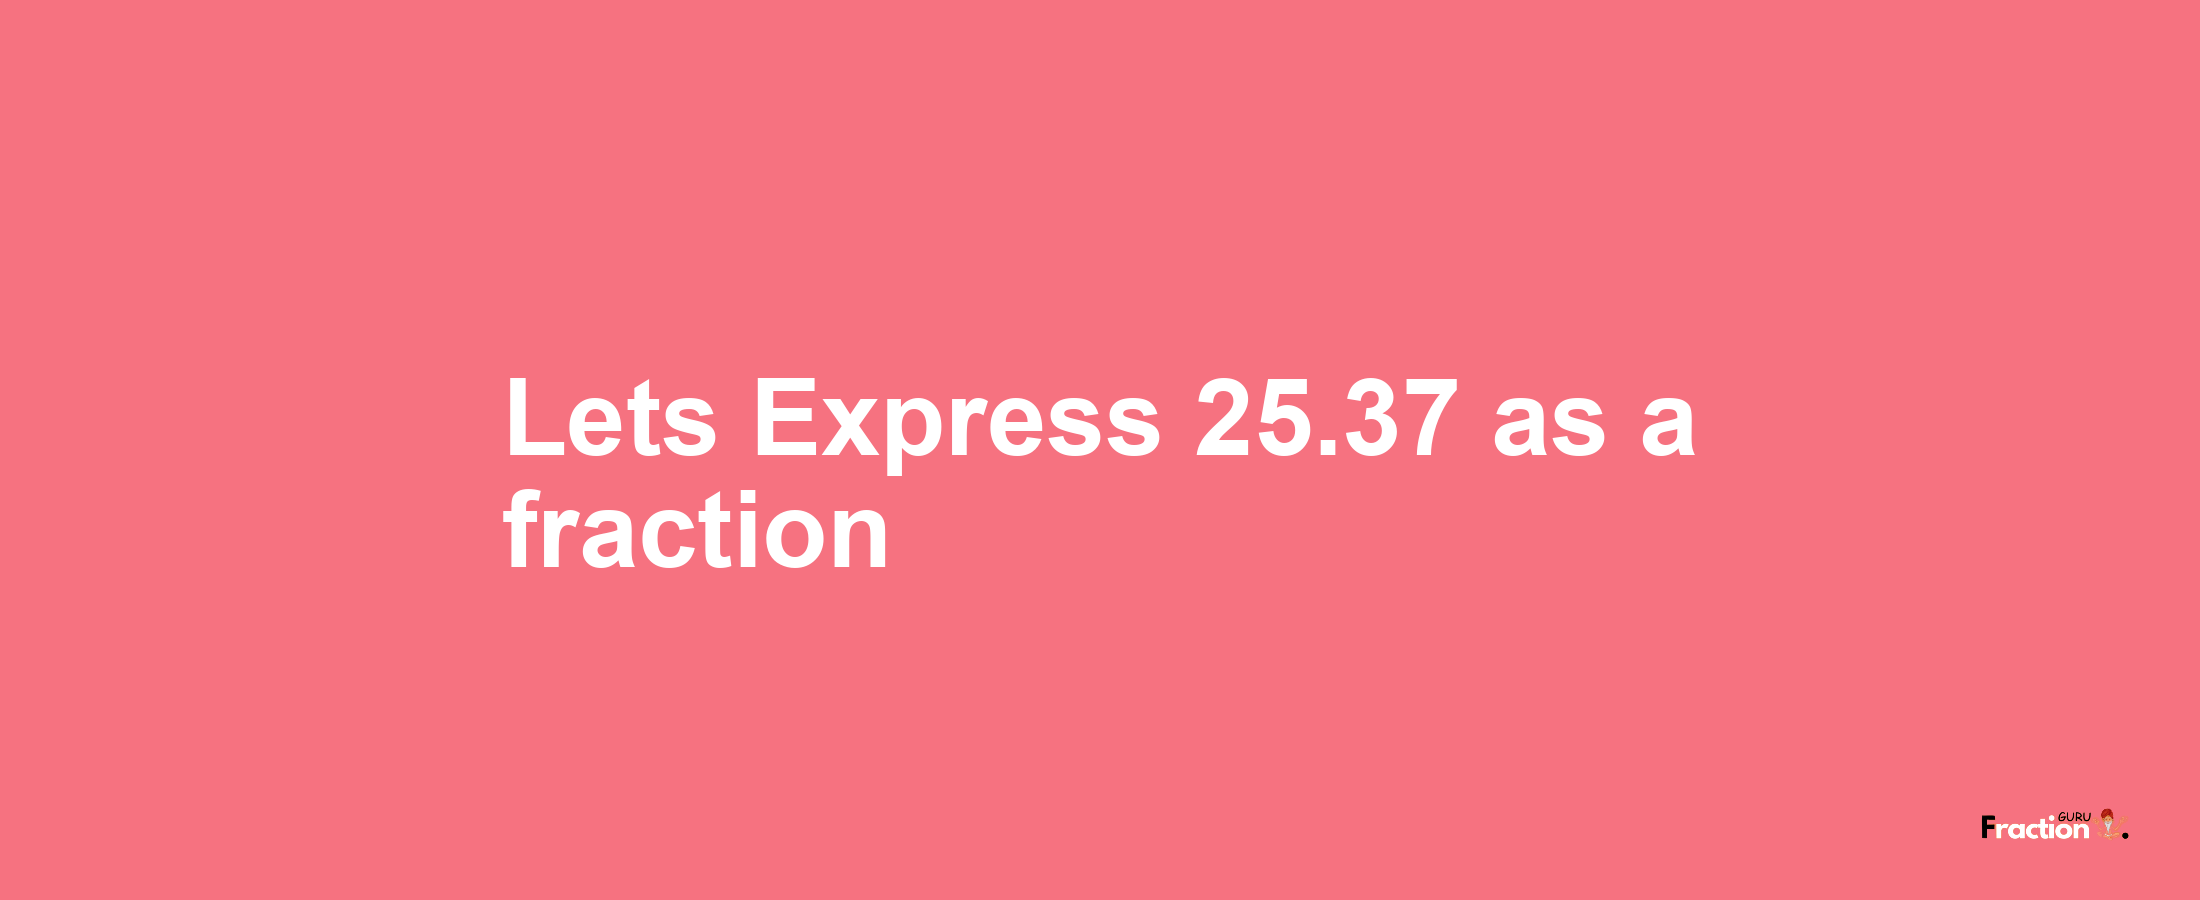 Lets Express 25.37 as afraction